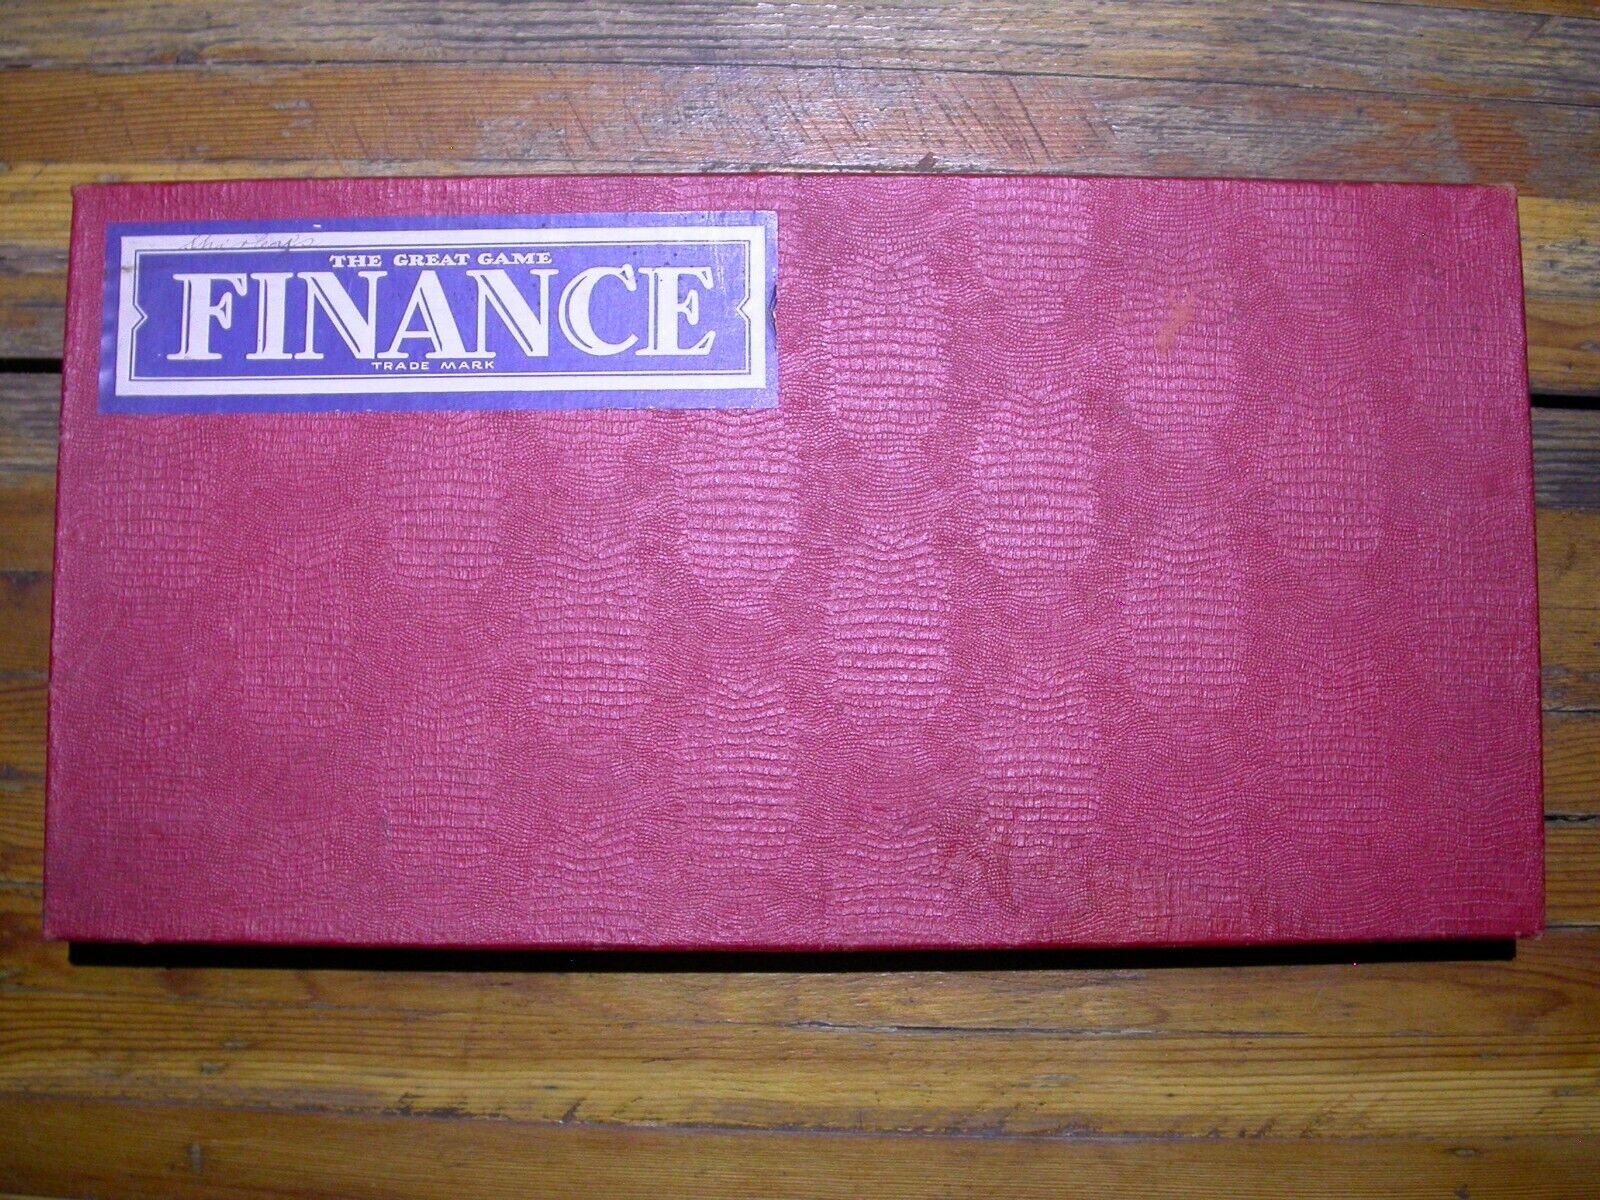 1936 Finance Game Company Edition - First Parker Brothers Edition